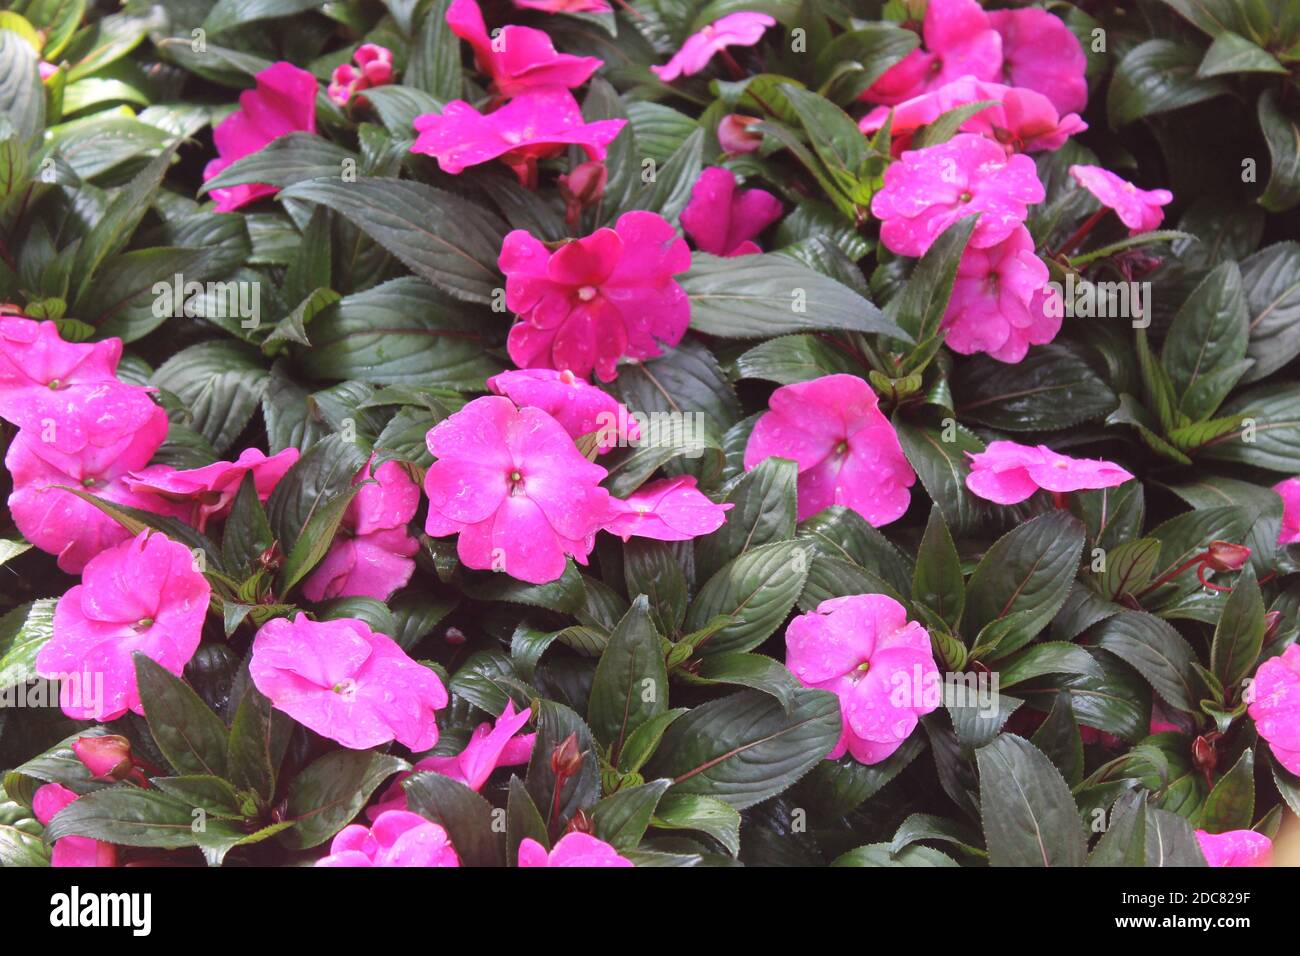 Bunch of nice fresh pink flowers with dew drops Stock Photo